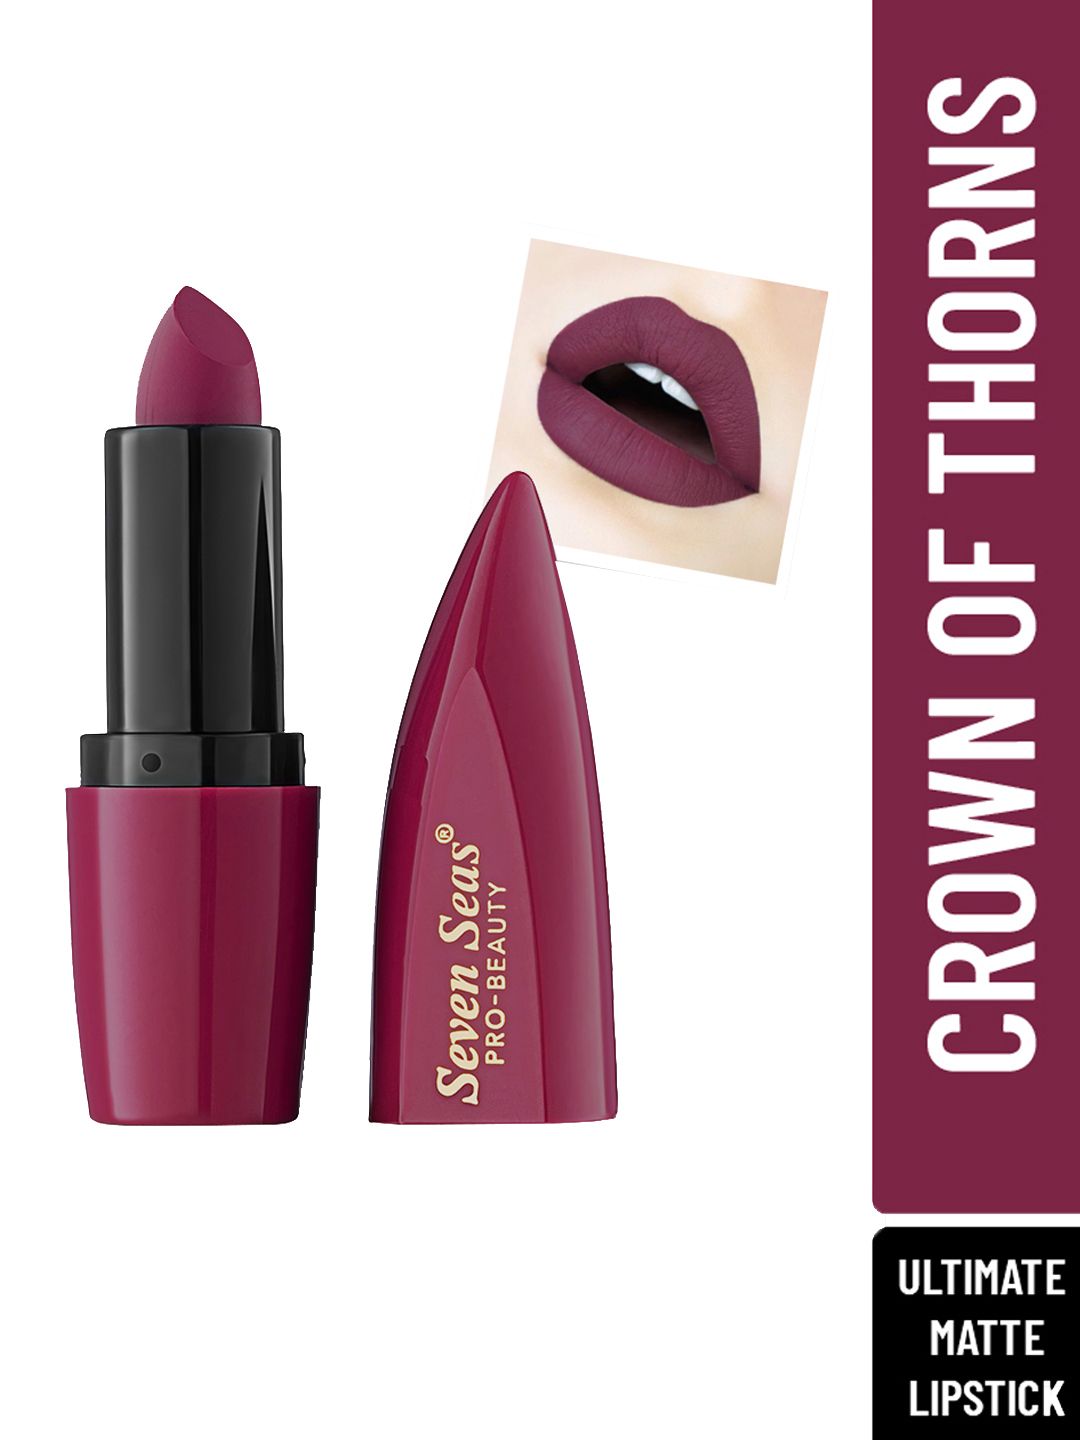 Seven Seas Ultimate Matte Lipstick - Crown of Thorns Price in India